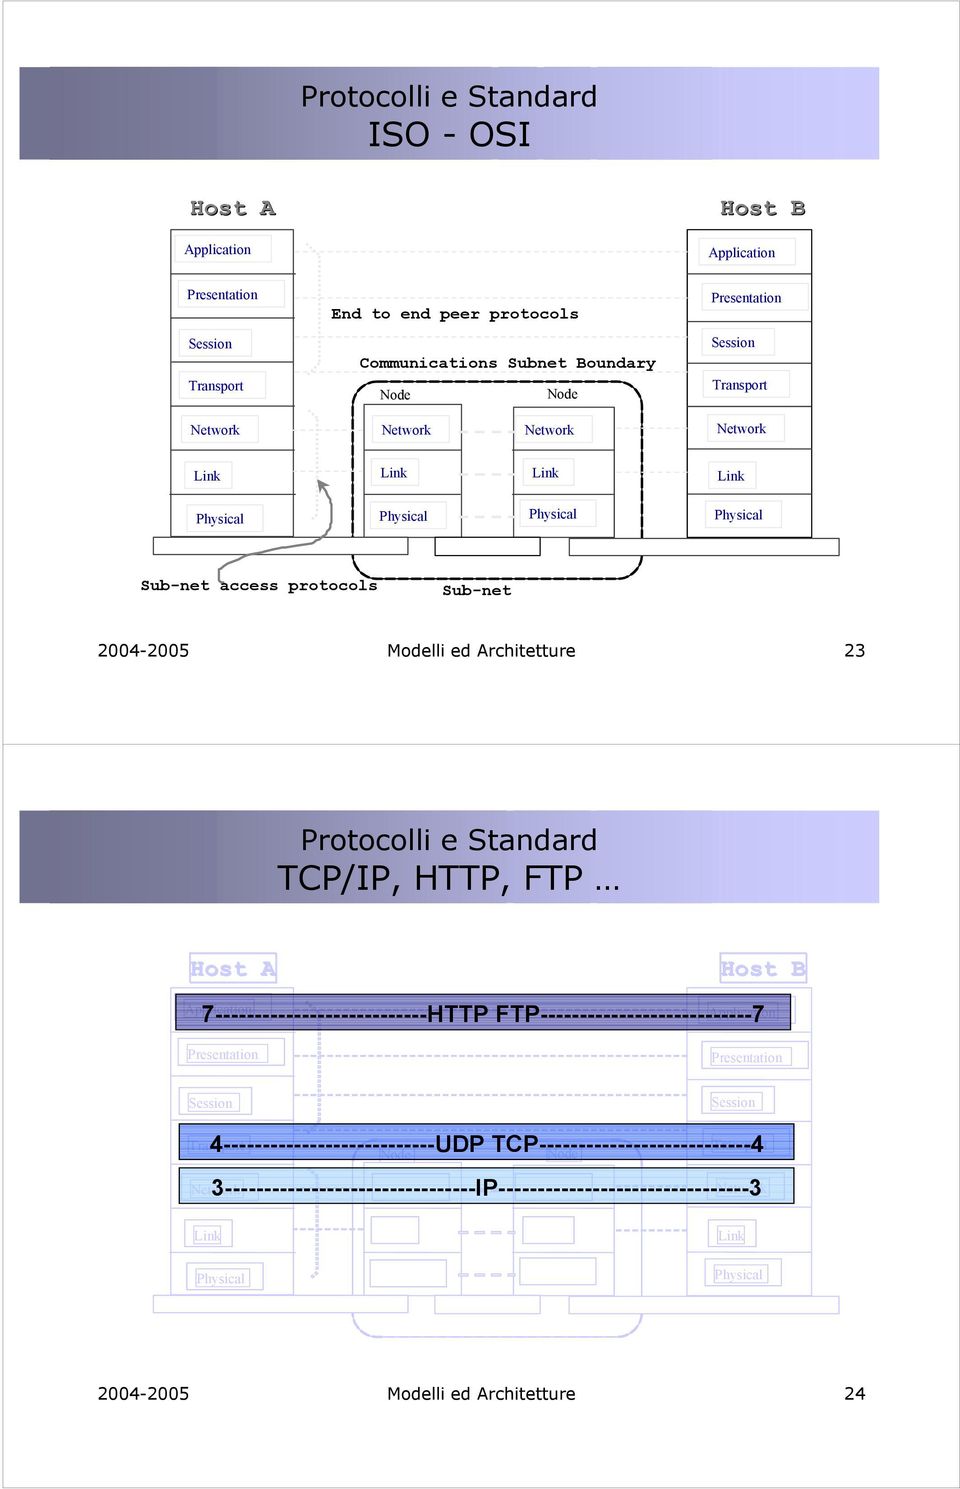 TCP/IP, HTTP, FTP Host A Host B 7---------------------------HTTP FTP---------------------------7 Application Application Presentation Presentation Session Session 4---------------------------UDP